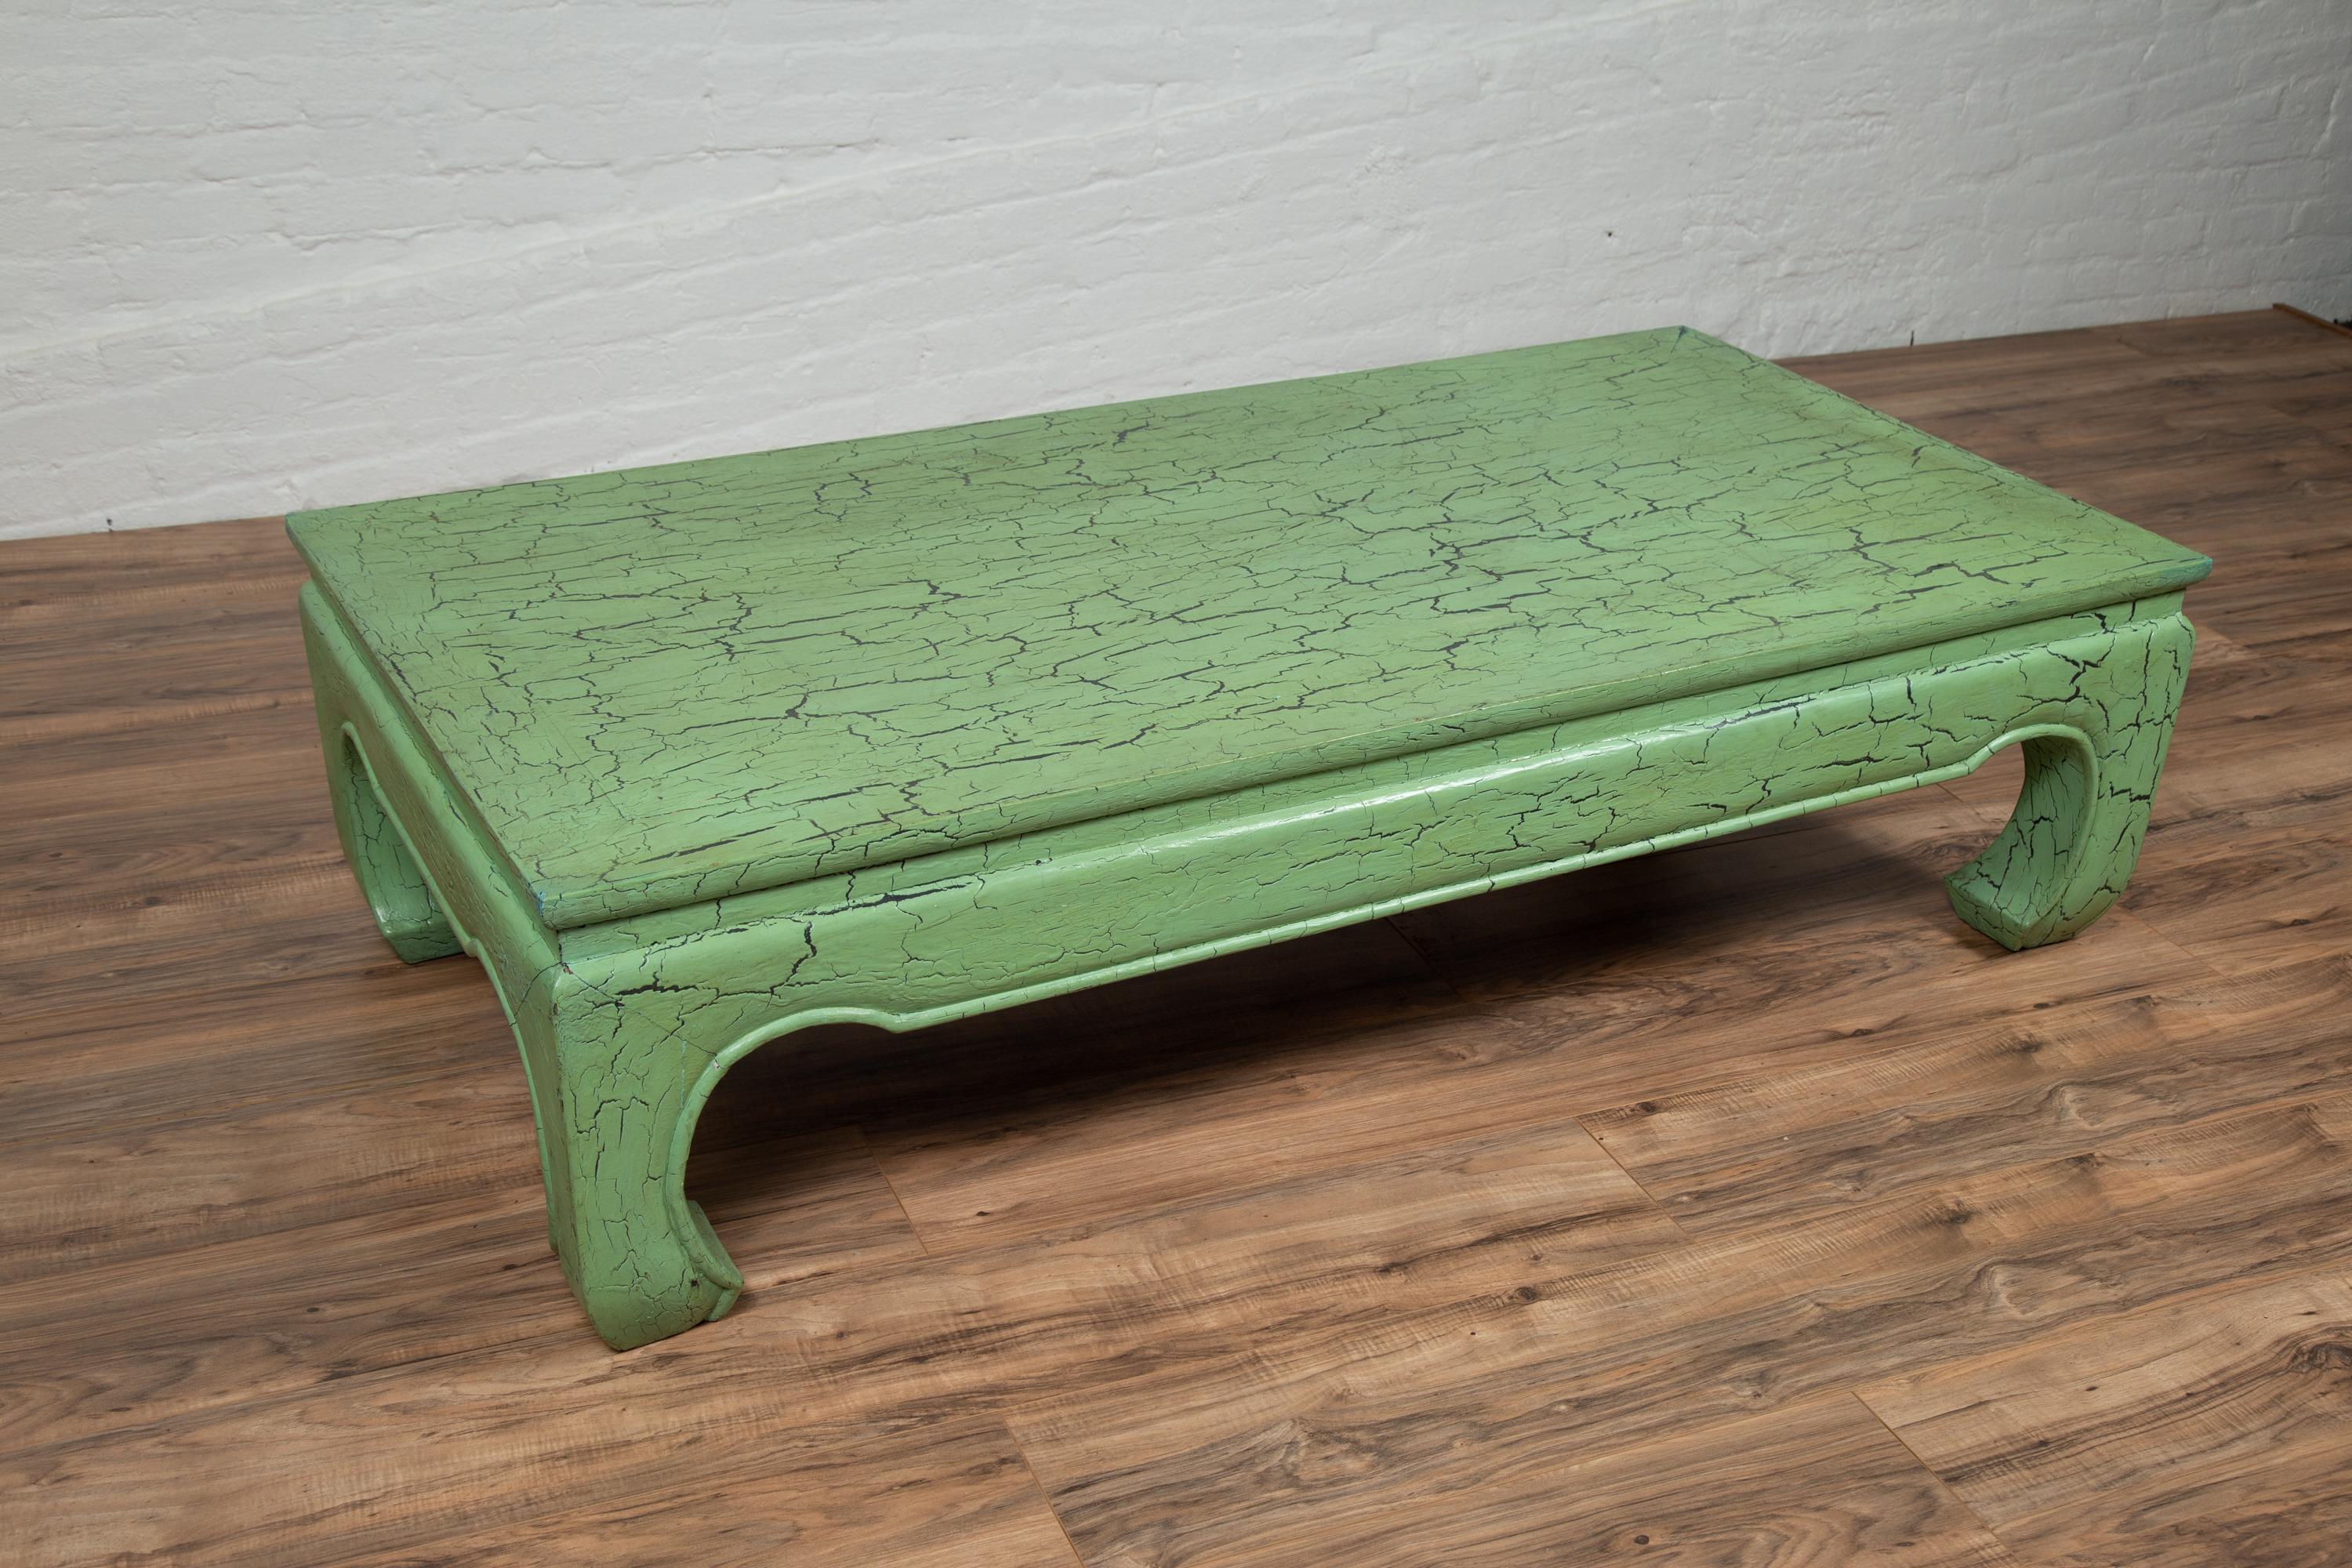 20th Century Vintage Thai Teak Coffee Table with Green Crackled Finish and Chow Legs, 1950s